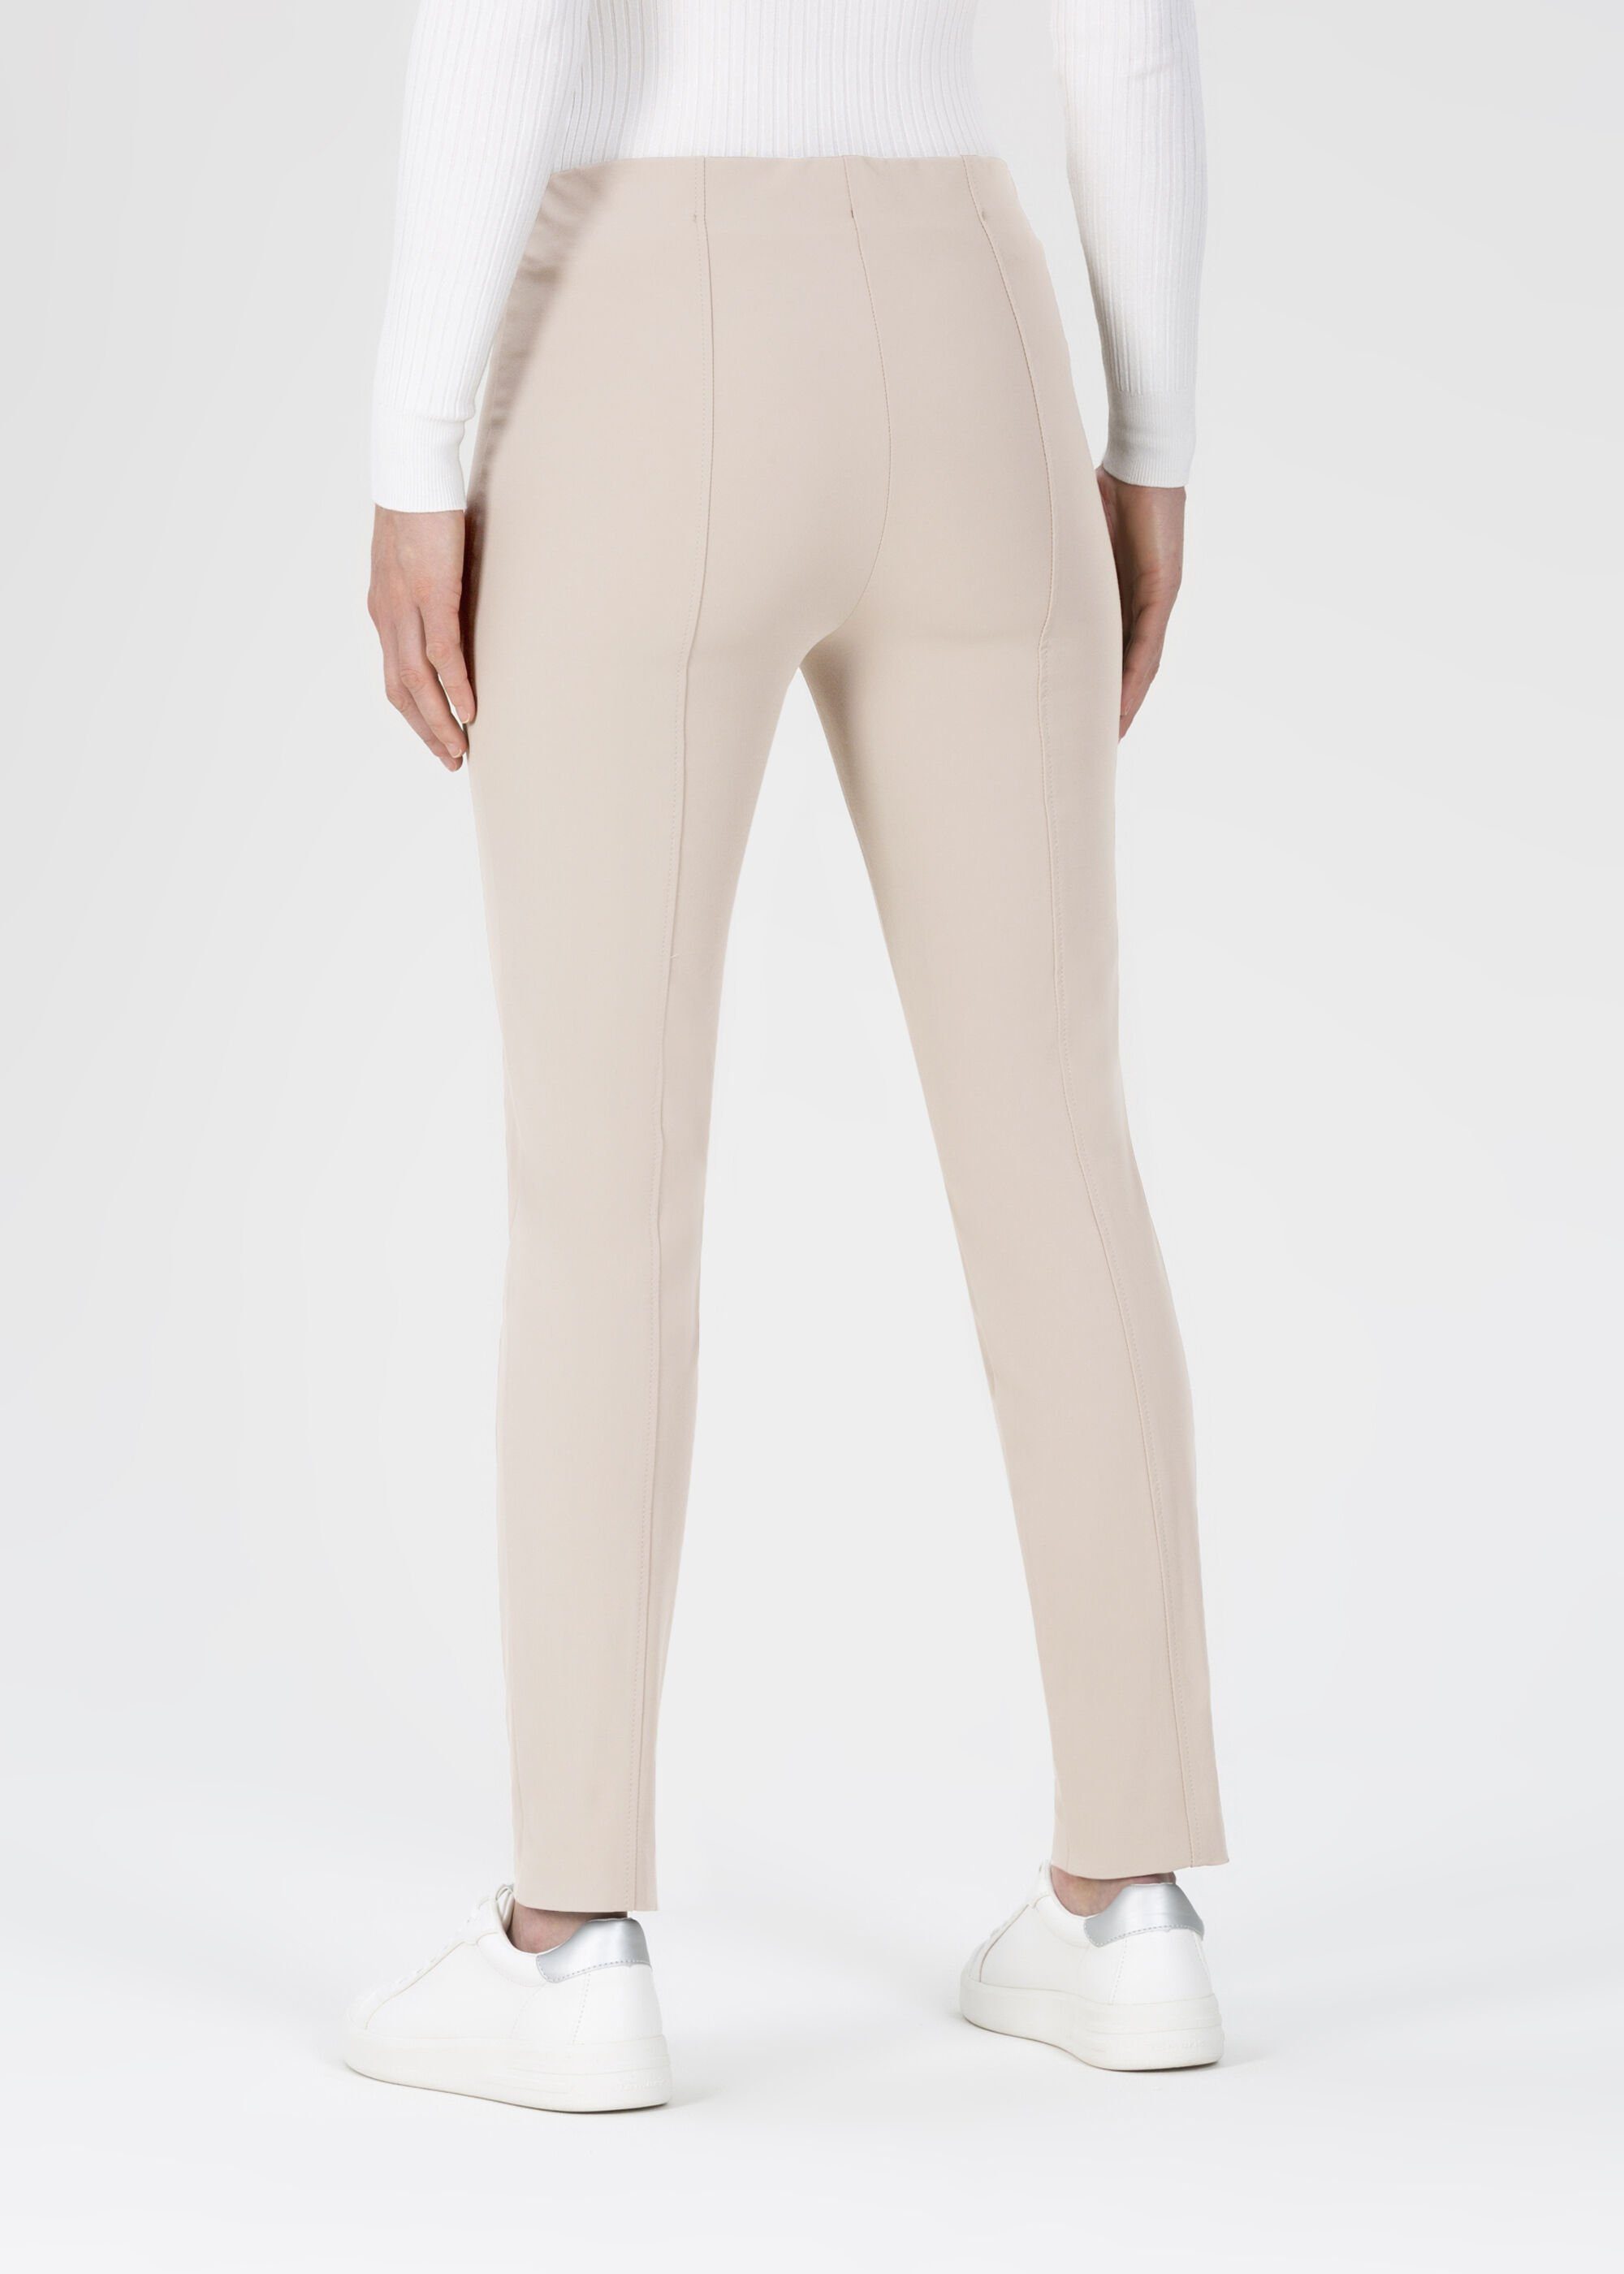 Unimuster Stehmann Culotte St Ann winter-white Isabel by